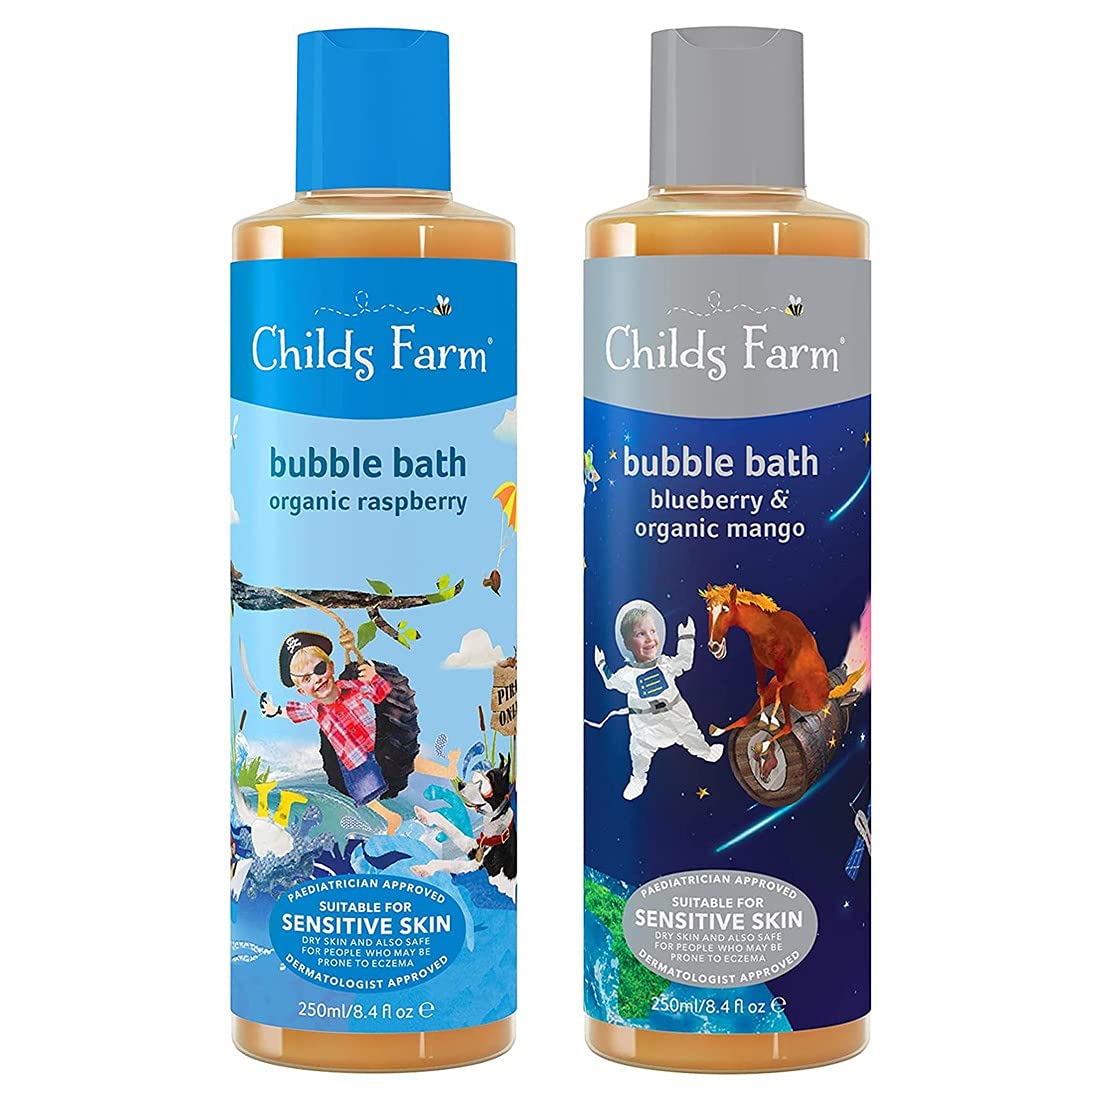 Childs Farm - Organic Raspberry 250ml and Blueberry | Organic Mango 250ml Gently Cleanses and Moisturises Sensitive Skin with Free Children's Bubble Bath Gift Bag